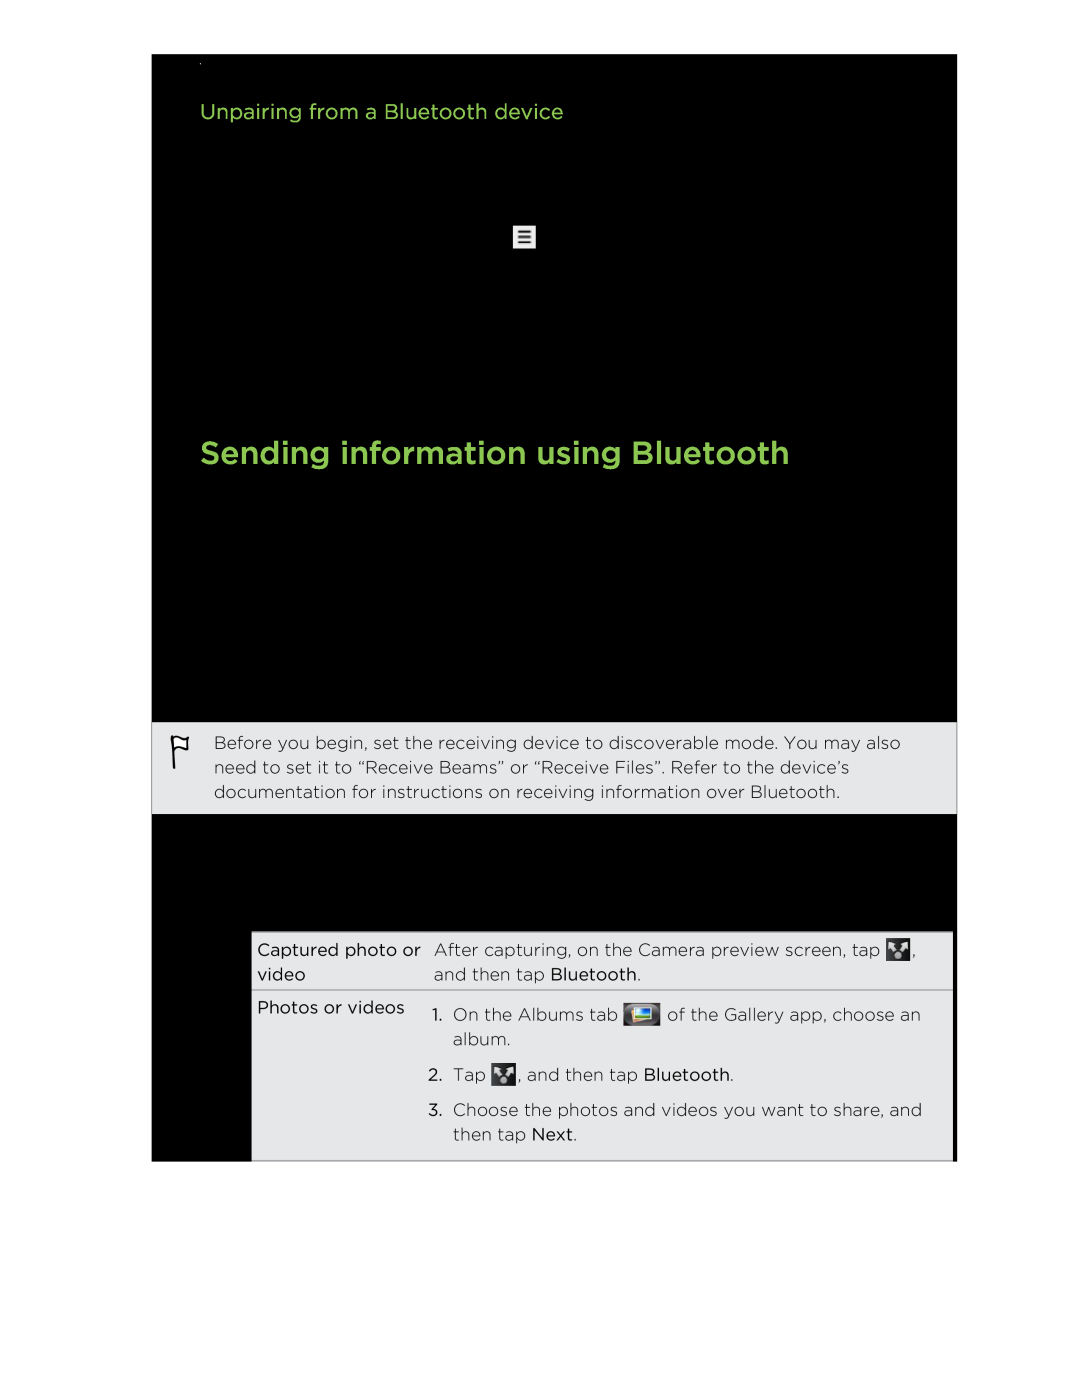 HTC manual Sending information using Bluetooth, Unpairing from a Bluetooth device 